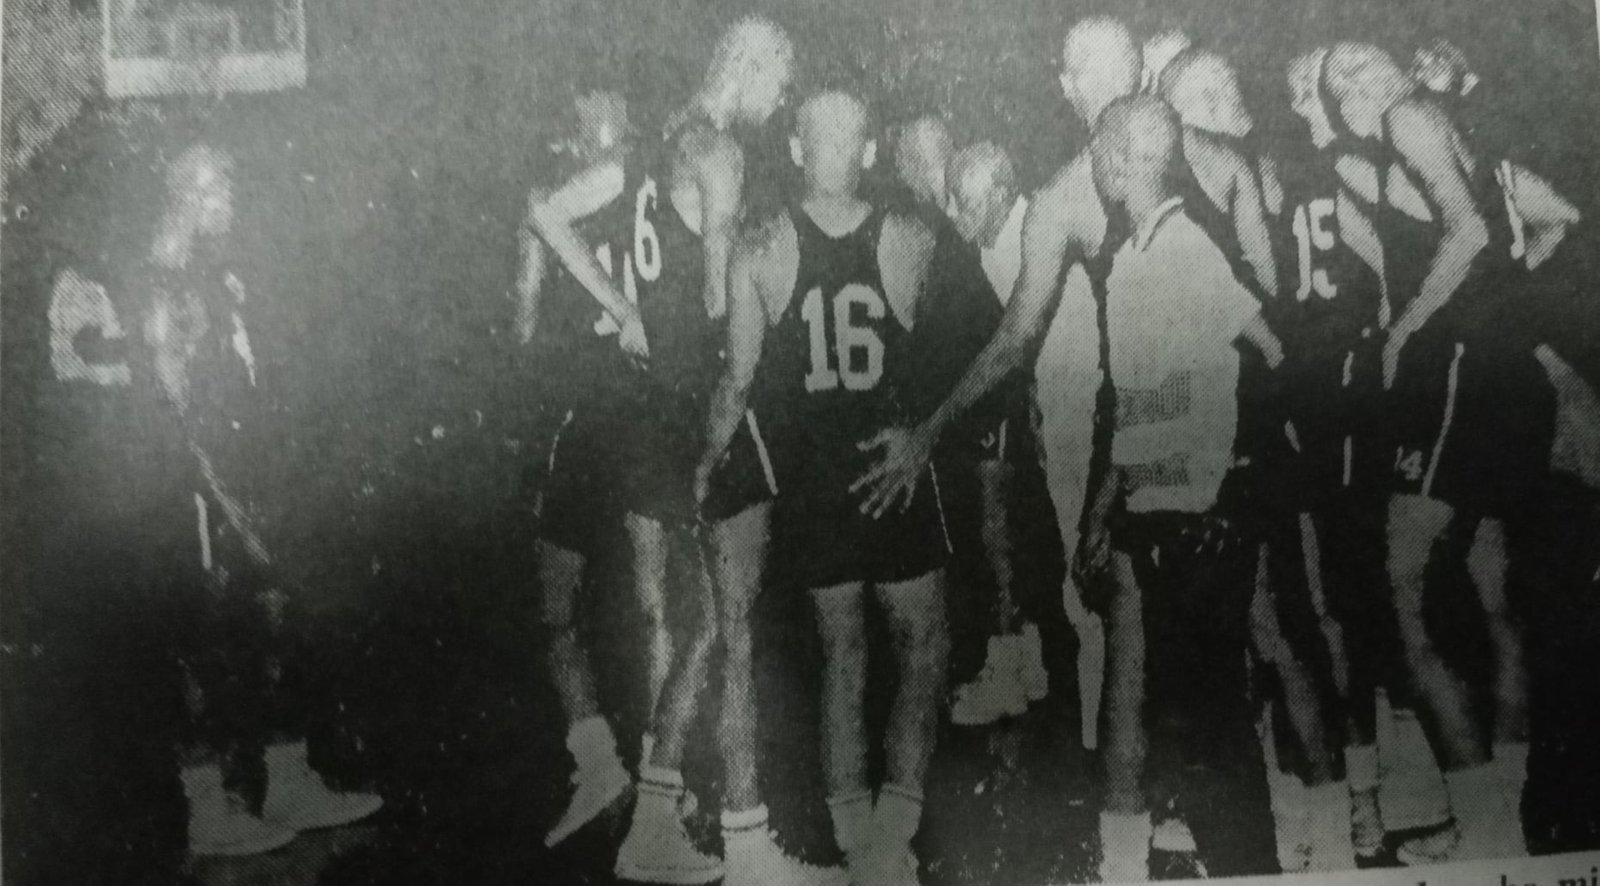 Ysmael Steel players and coaching staff came into the third-place game against Puyat Steel in the 1969 National Senior tournament bald-headed after being dethroned in losses to Yco and Yutivo.